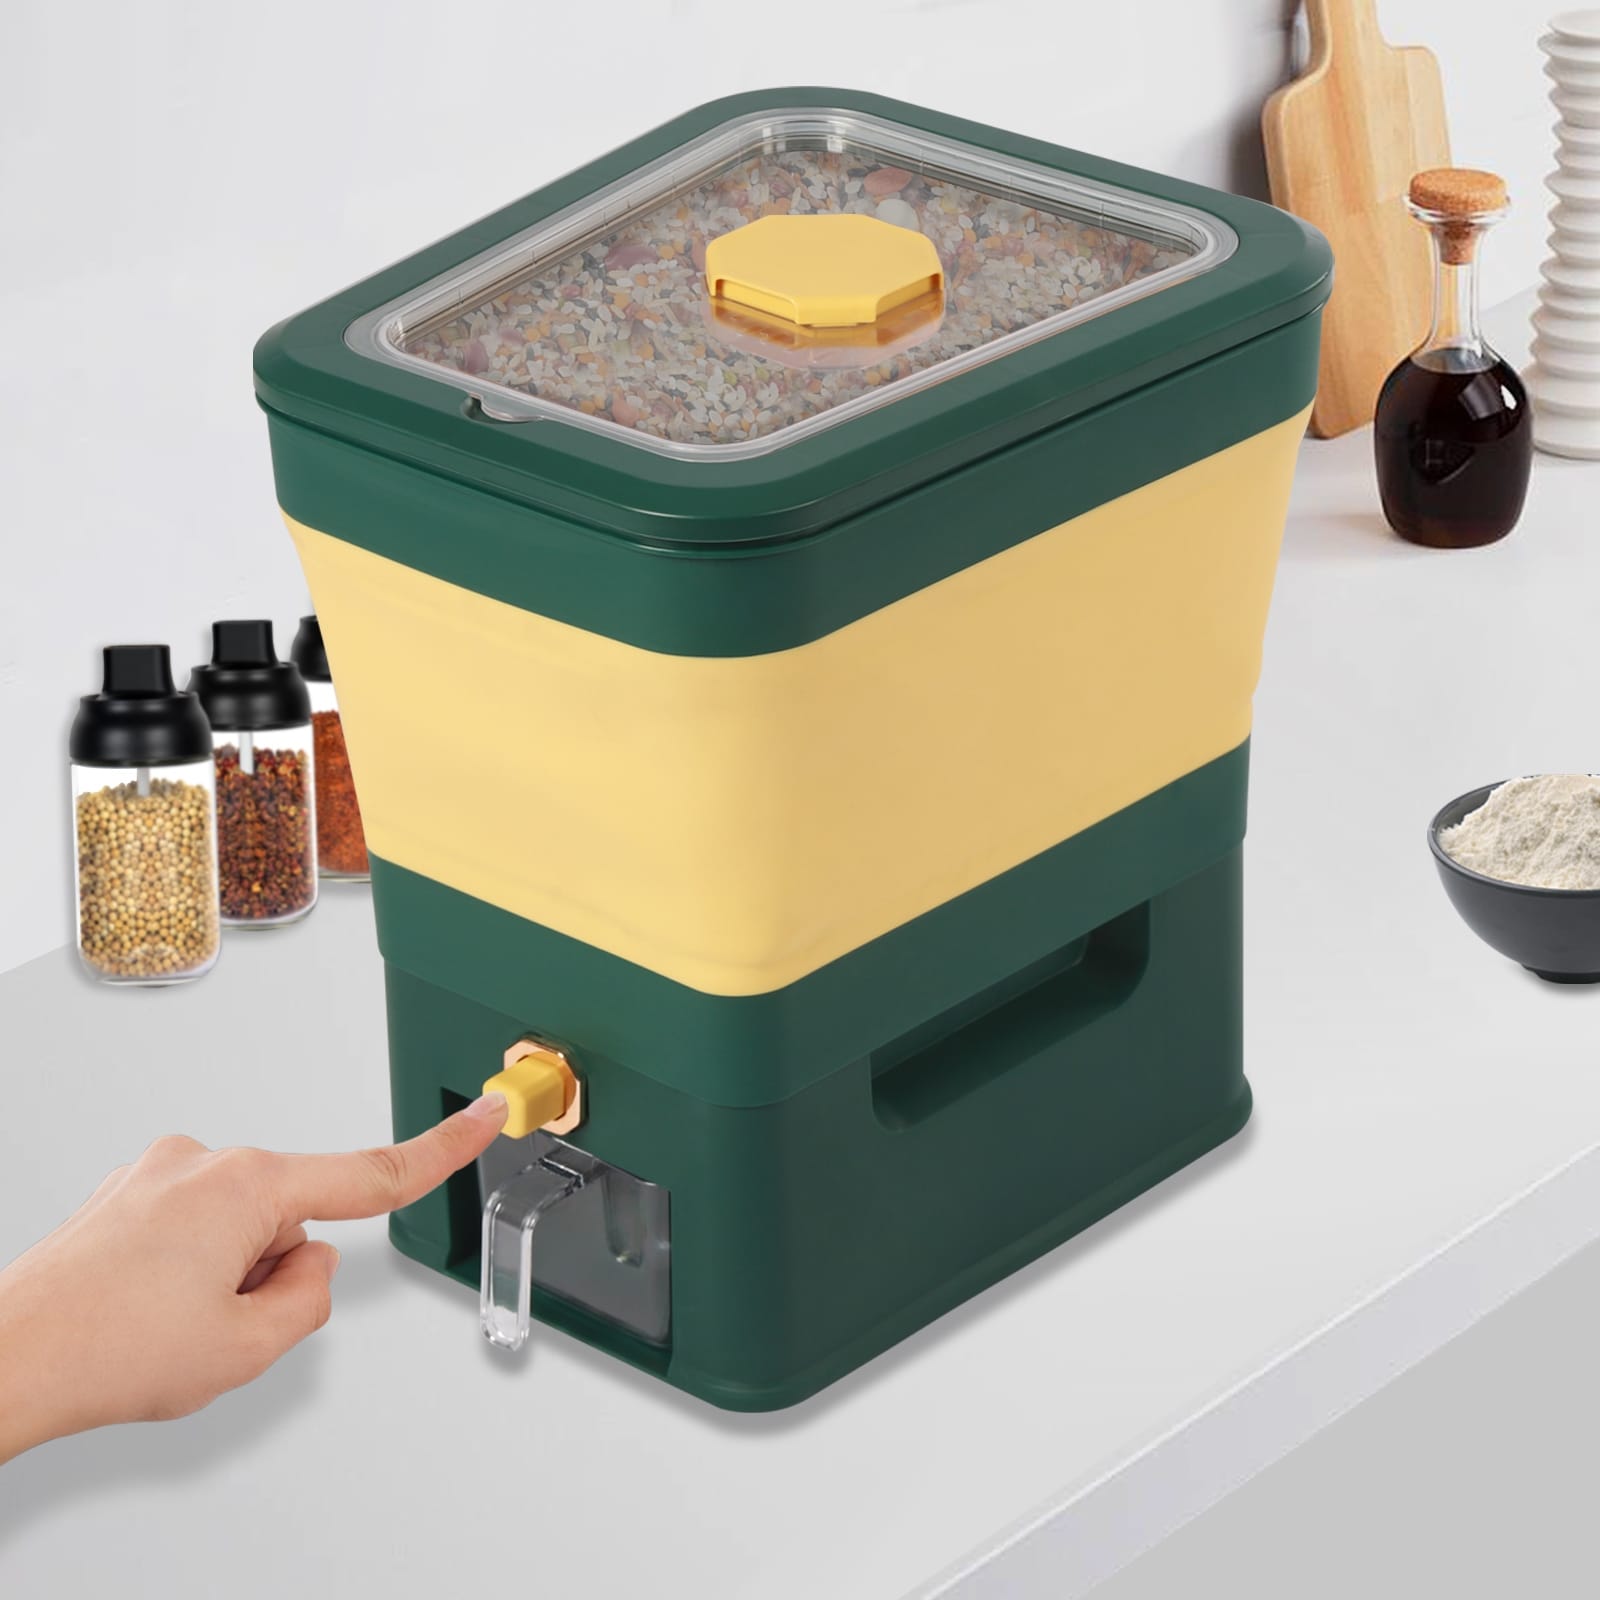 https://ak1.ostkcdn.com/images/products/is/images/direct/d10981b7b1c971d5910e73f0f5e67a3432c54c2d/Collapsible-Rice-Dispenser-Grain-Container-with-Transparent-Lid.jpg